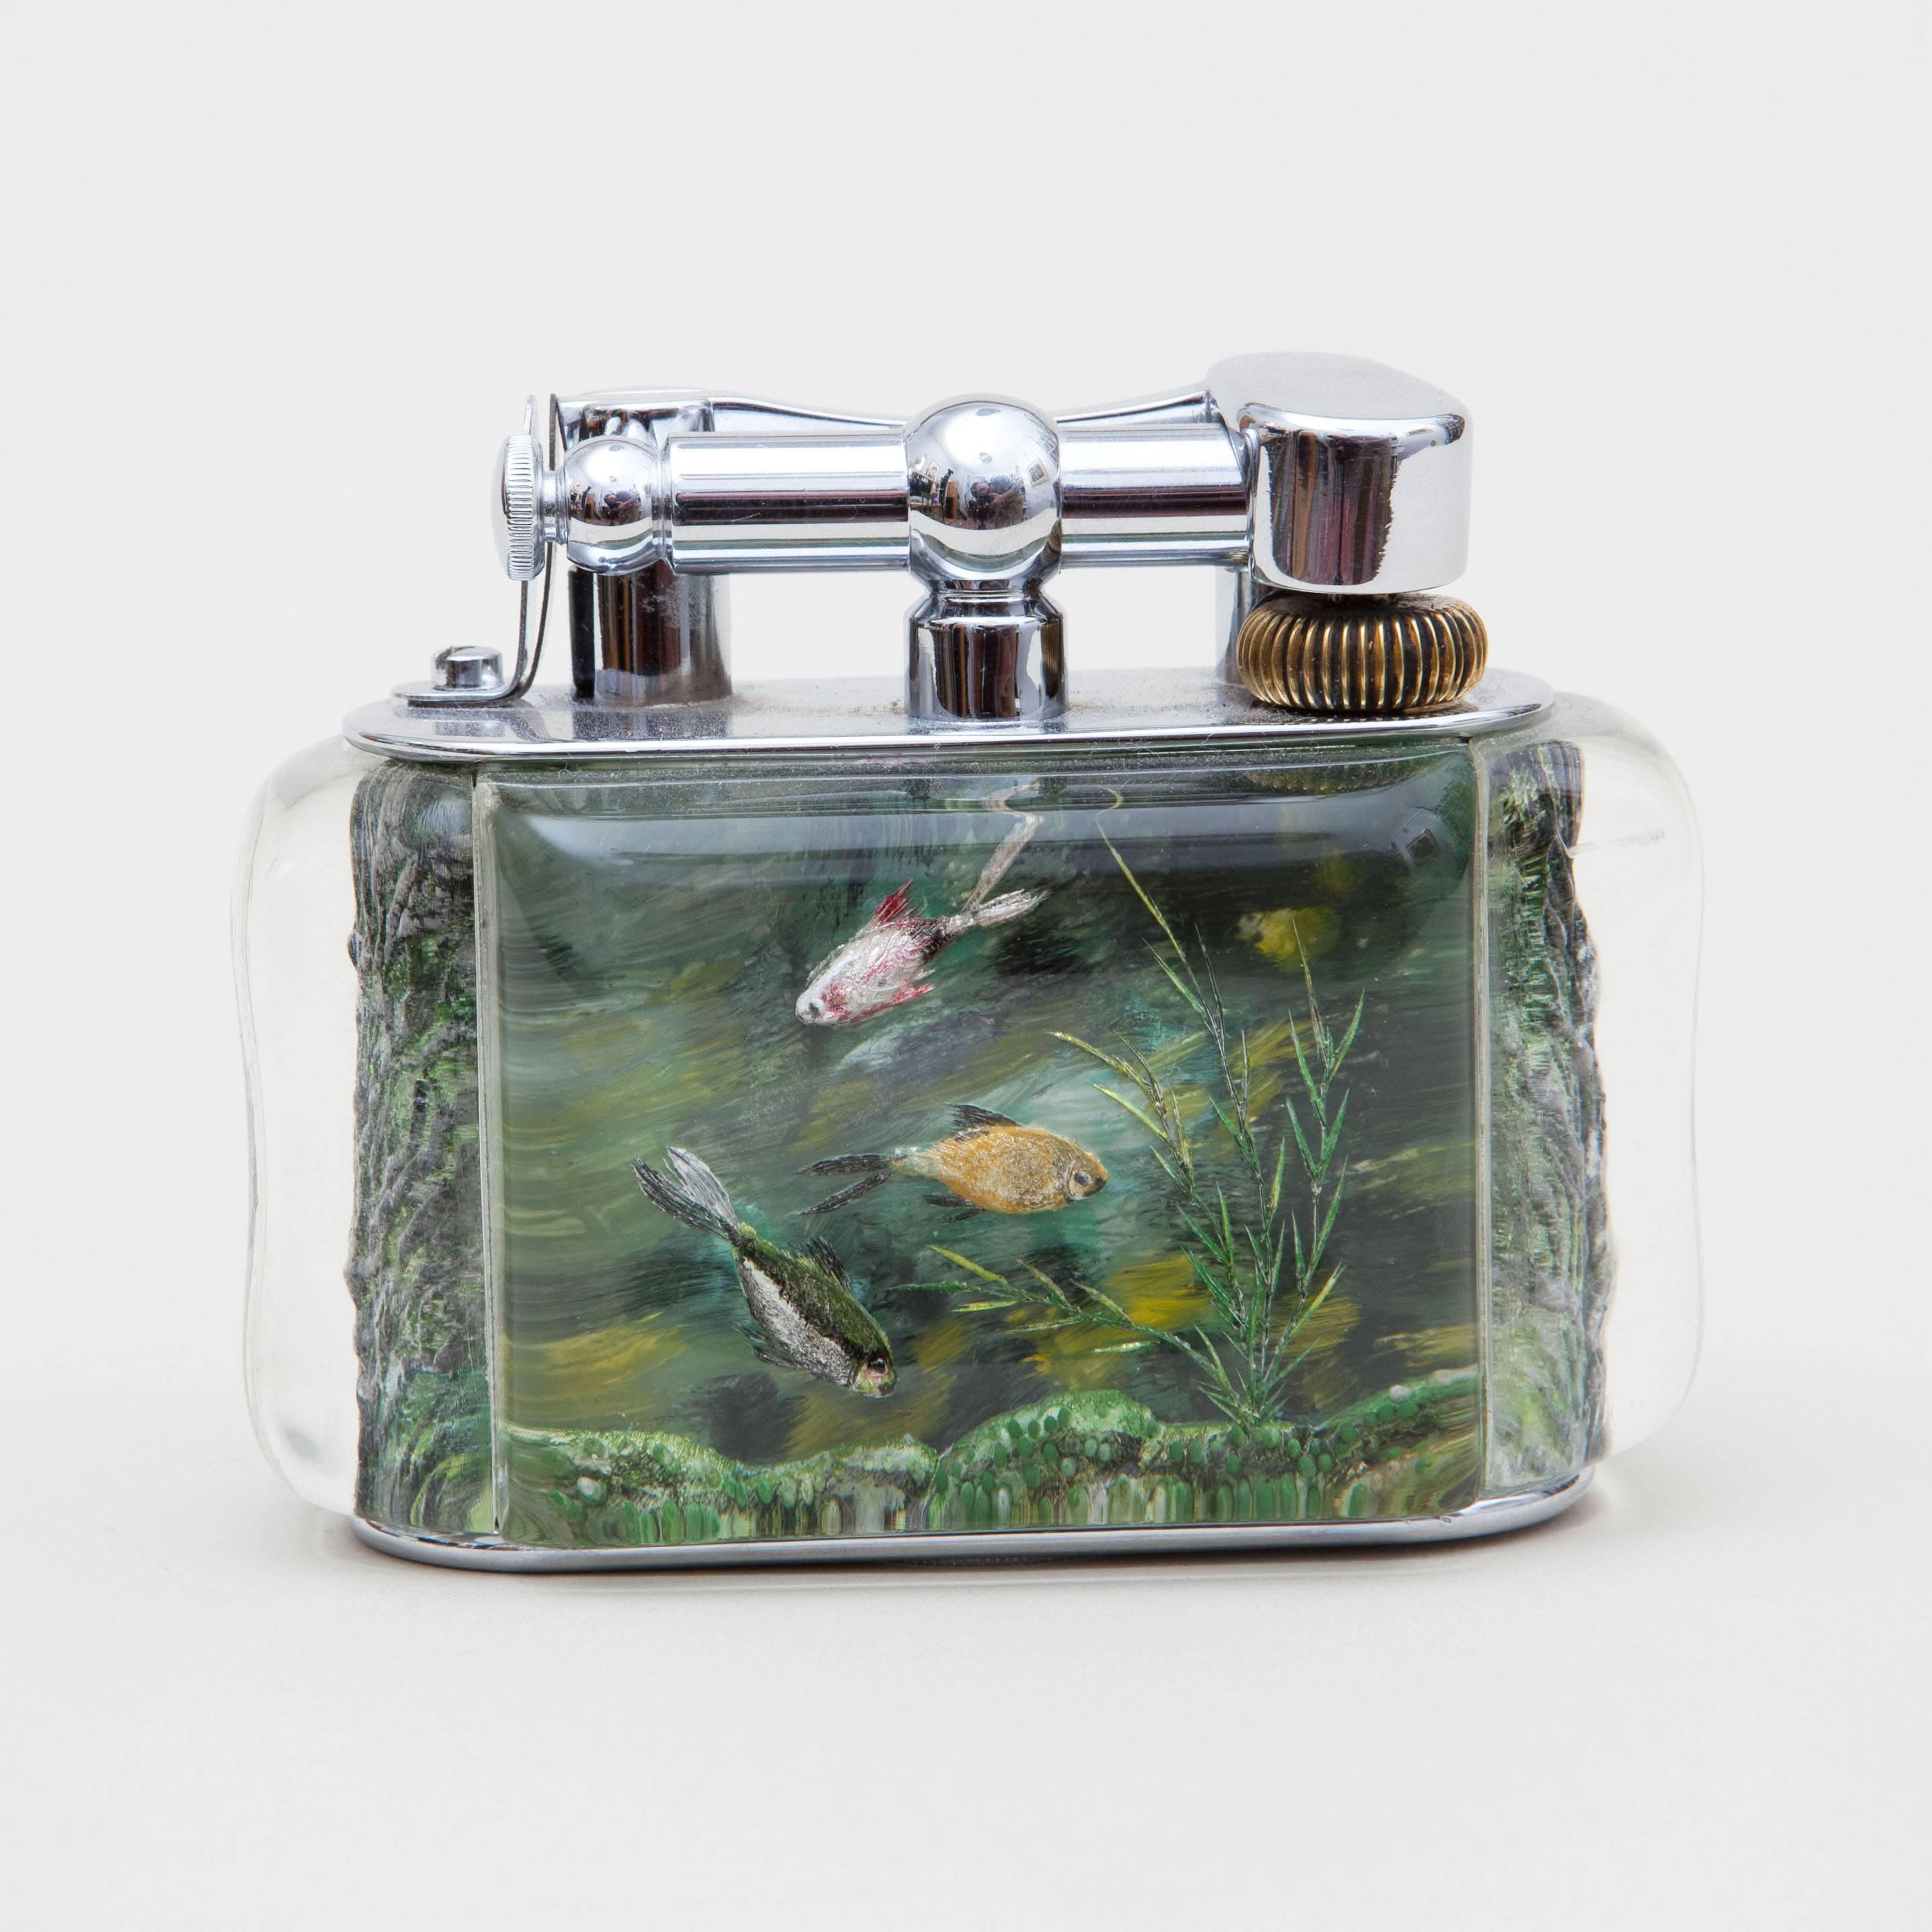 England, circa 1950.
​
A rare mid-20th century early Dunhill 'Aquarium' table lighter, the chrome body with sprung lift arm with Dunhill in high relief. With four panels of engraved Lucite forming two distinct scenes separated by the end panels.